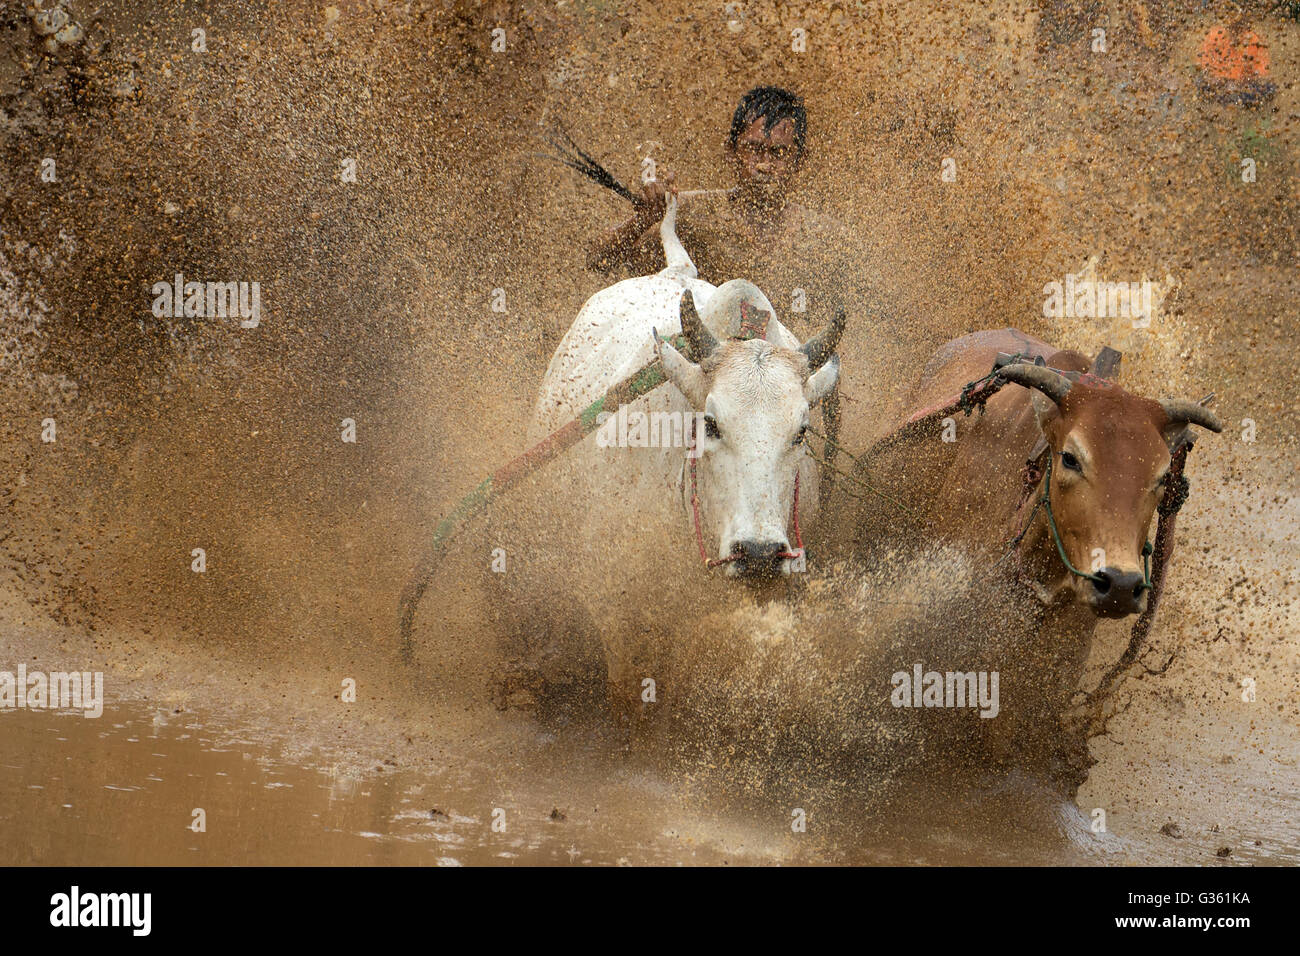 A jockey controlling his cow during the action of Pacu Jawi (Cow Race) in West Sumatra, Indonesia. Stock Photo